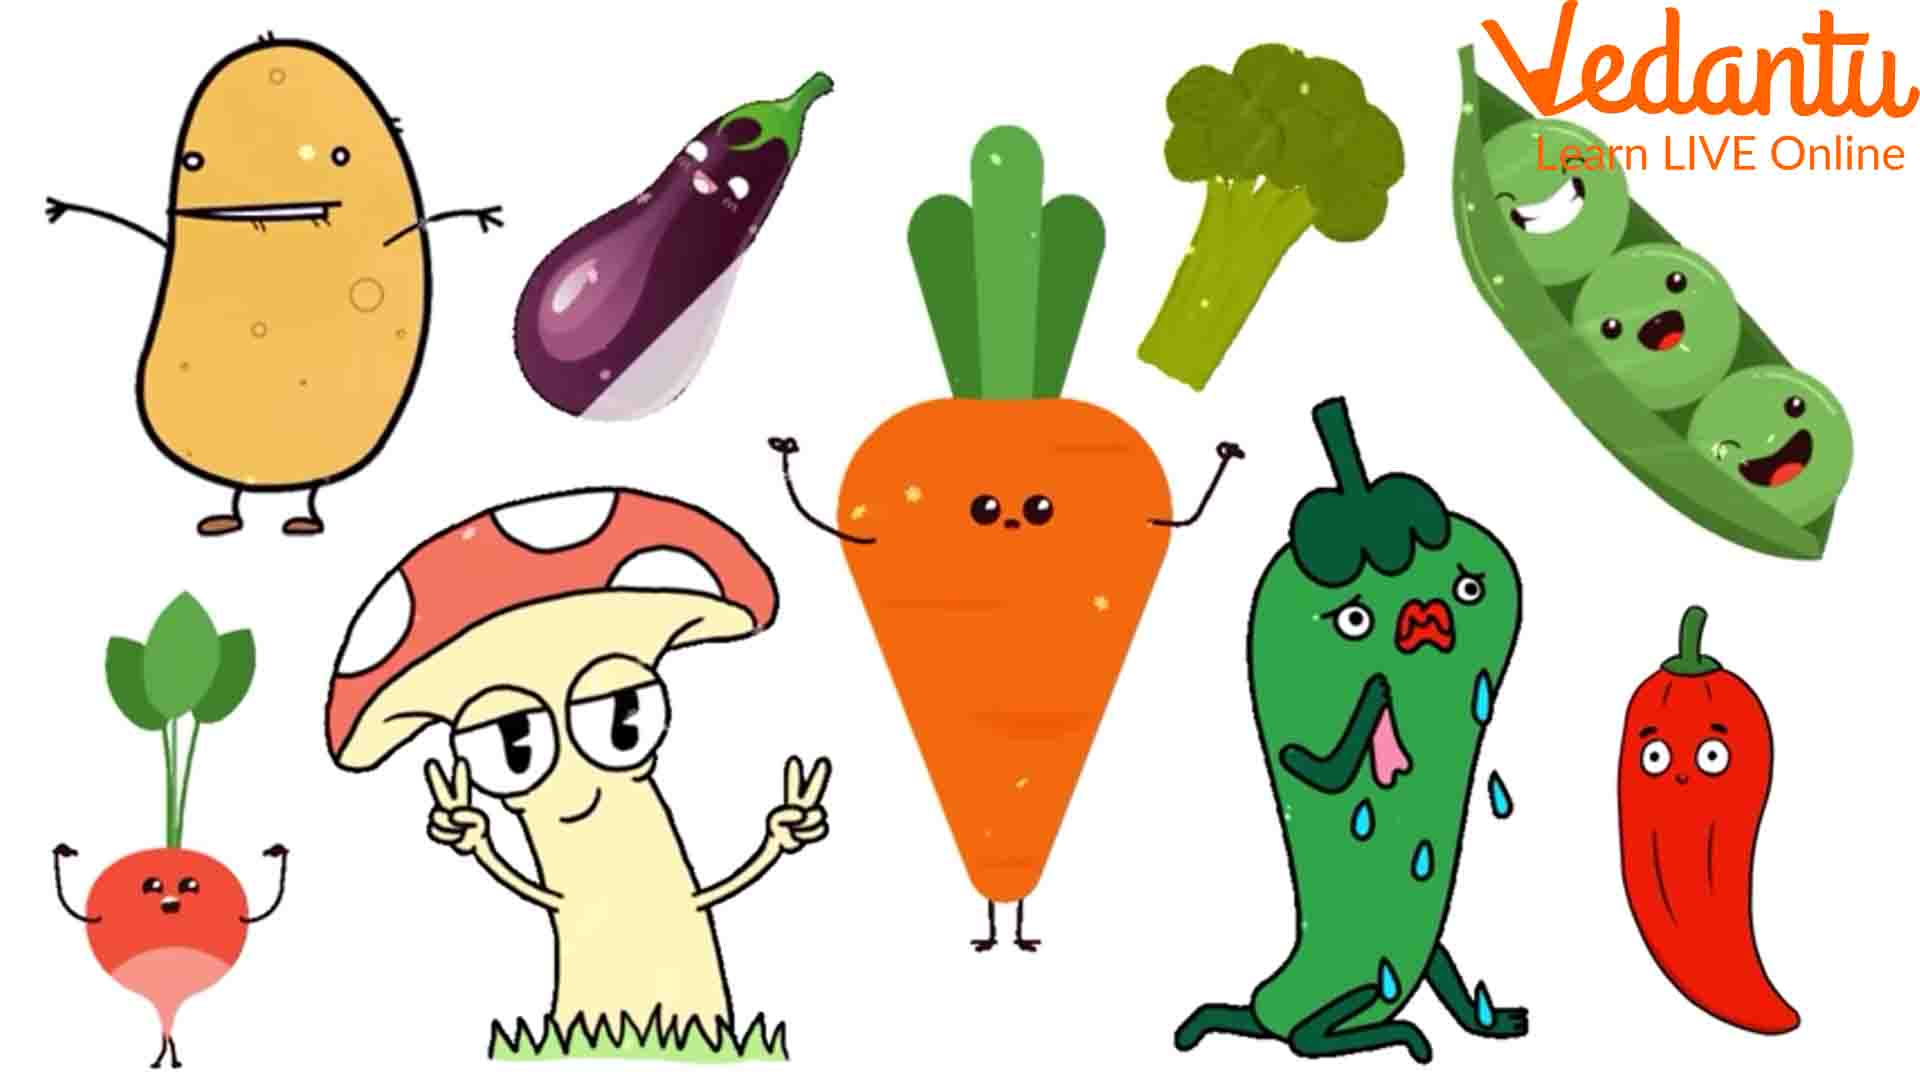 List of 10 Vegetable Names and Their Benefits for a Healthier Life